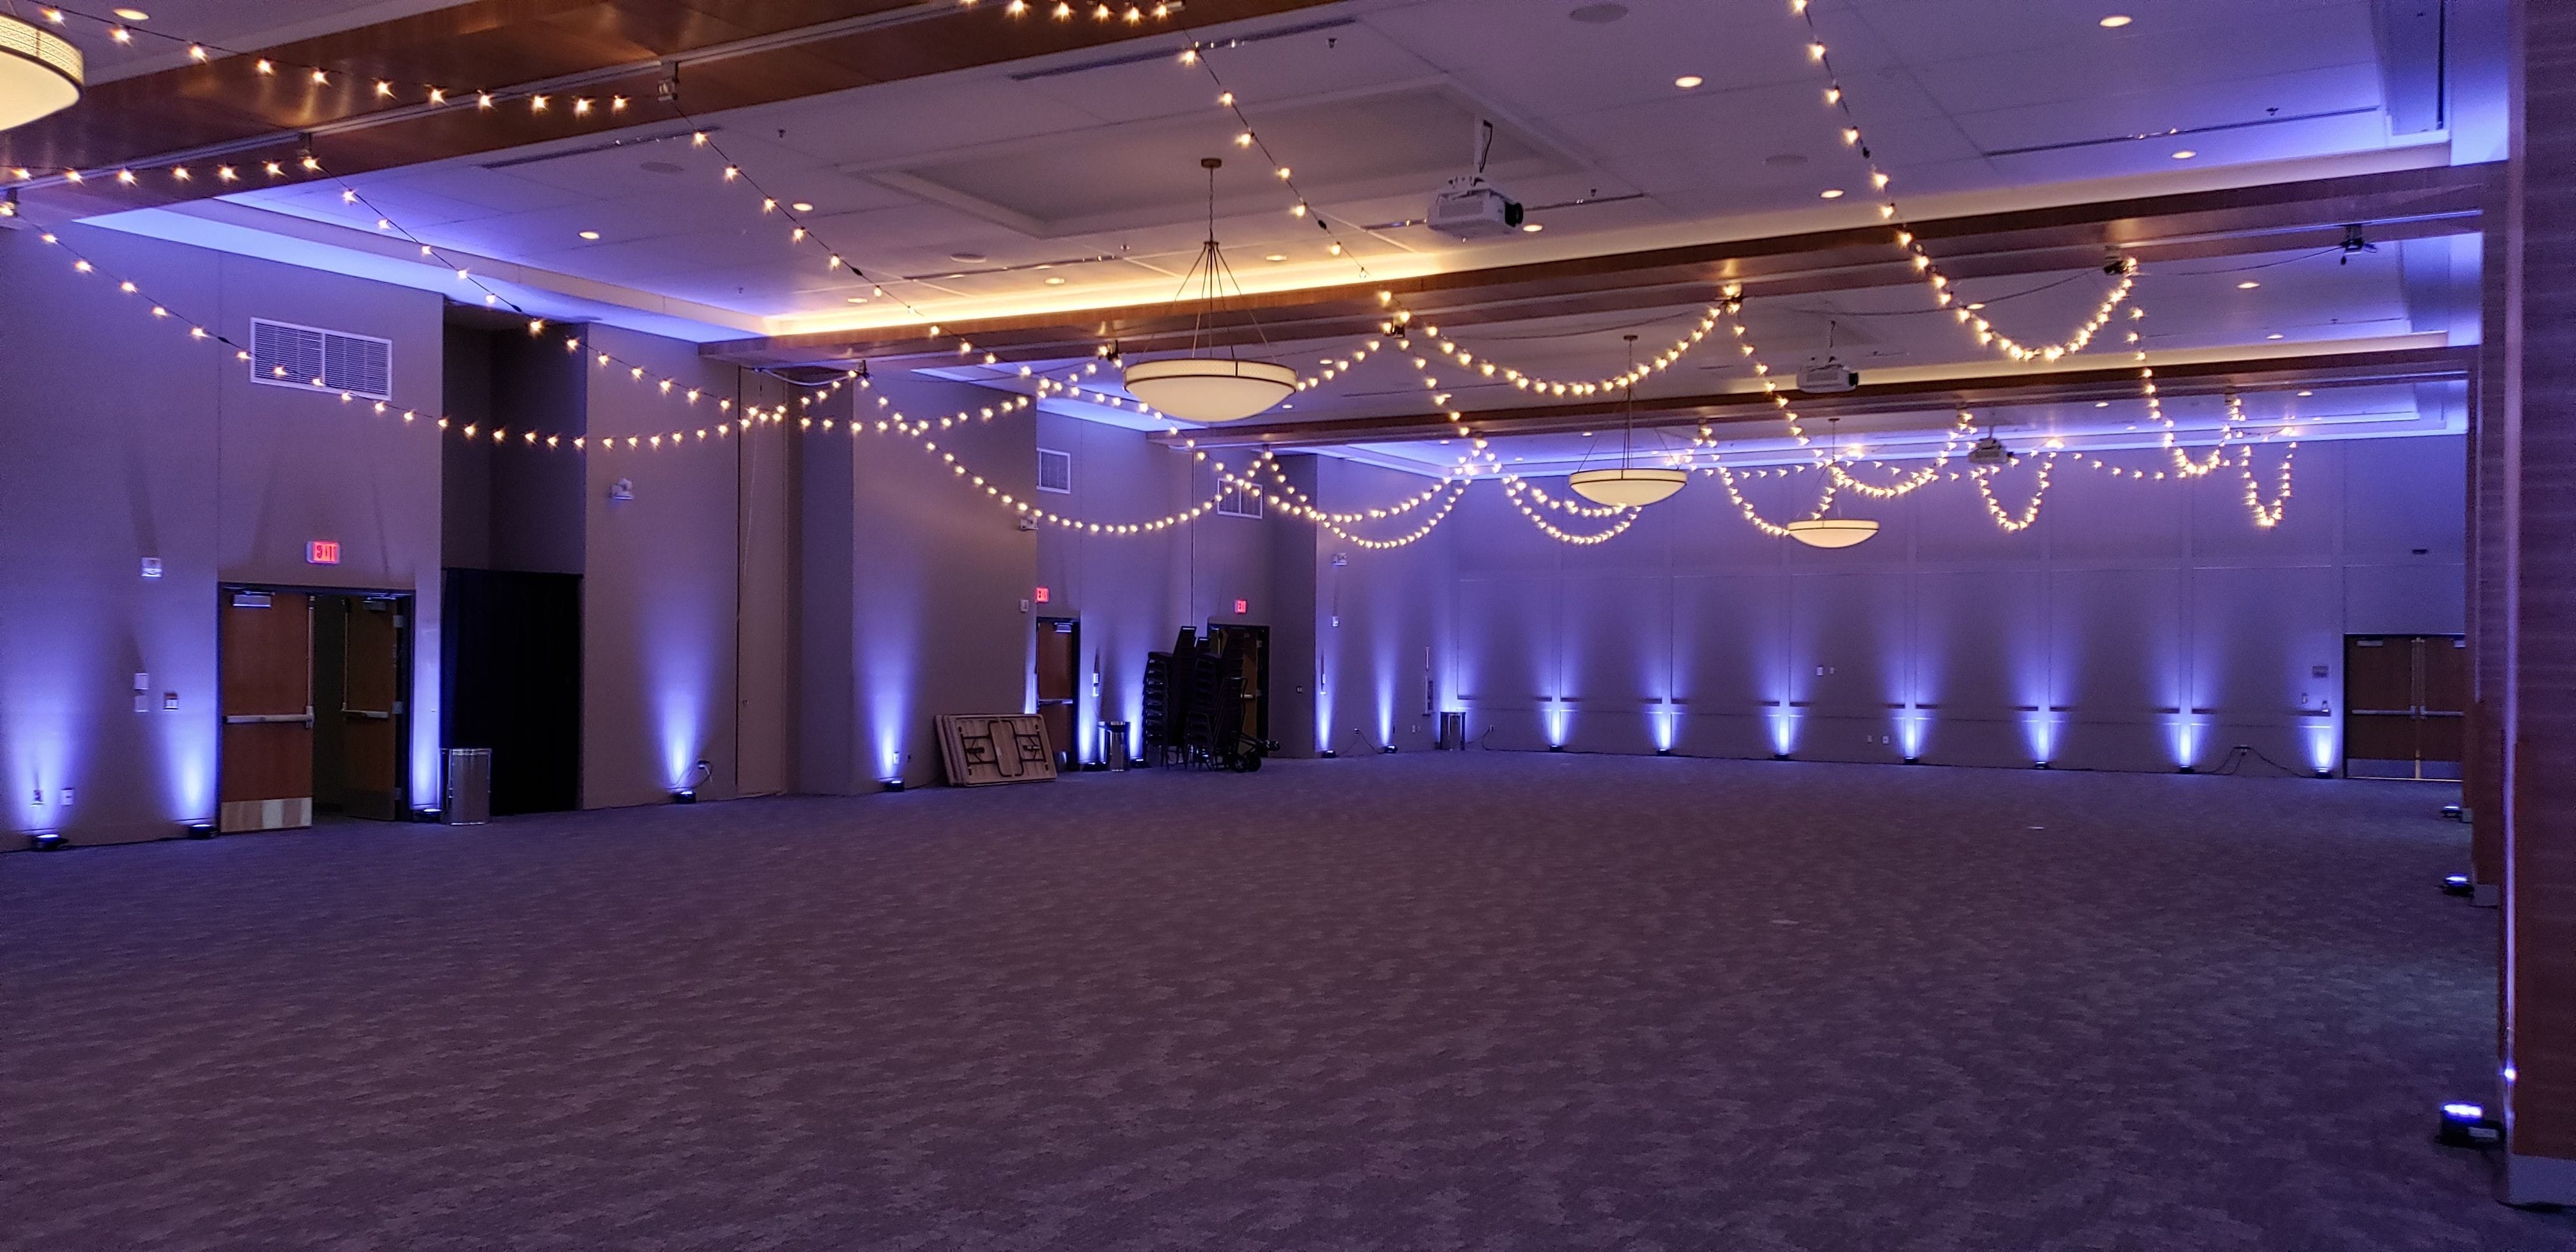 Iron Trail Motors Event Center wedding lighting in dusty blue up lighting and bistro on the ceiling by Duluth Event Lighting.